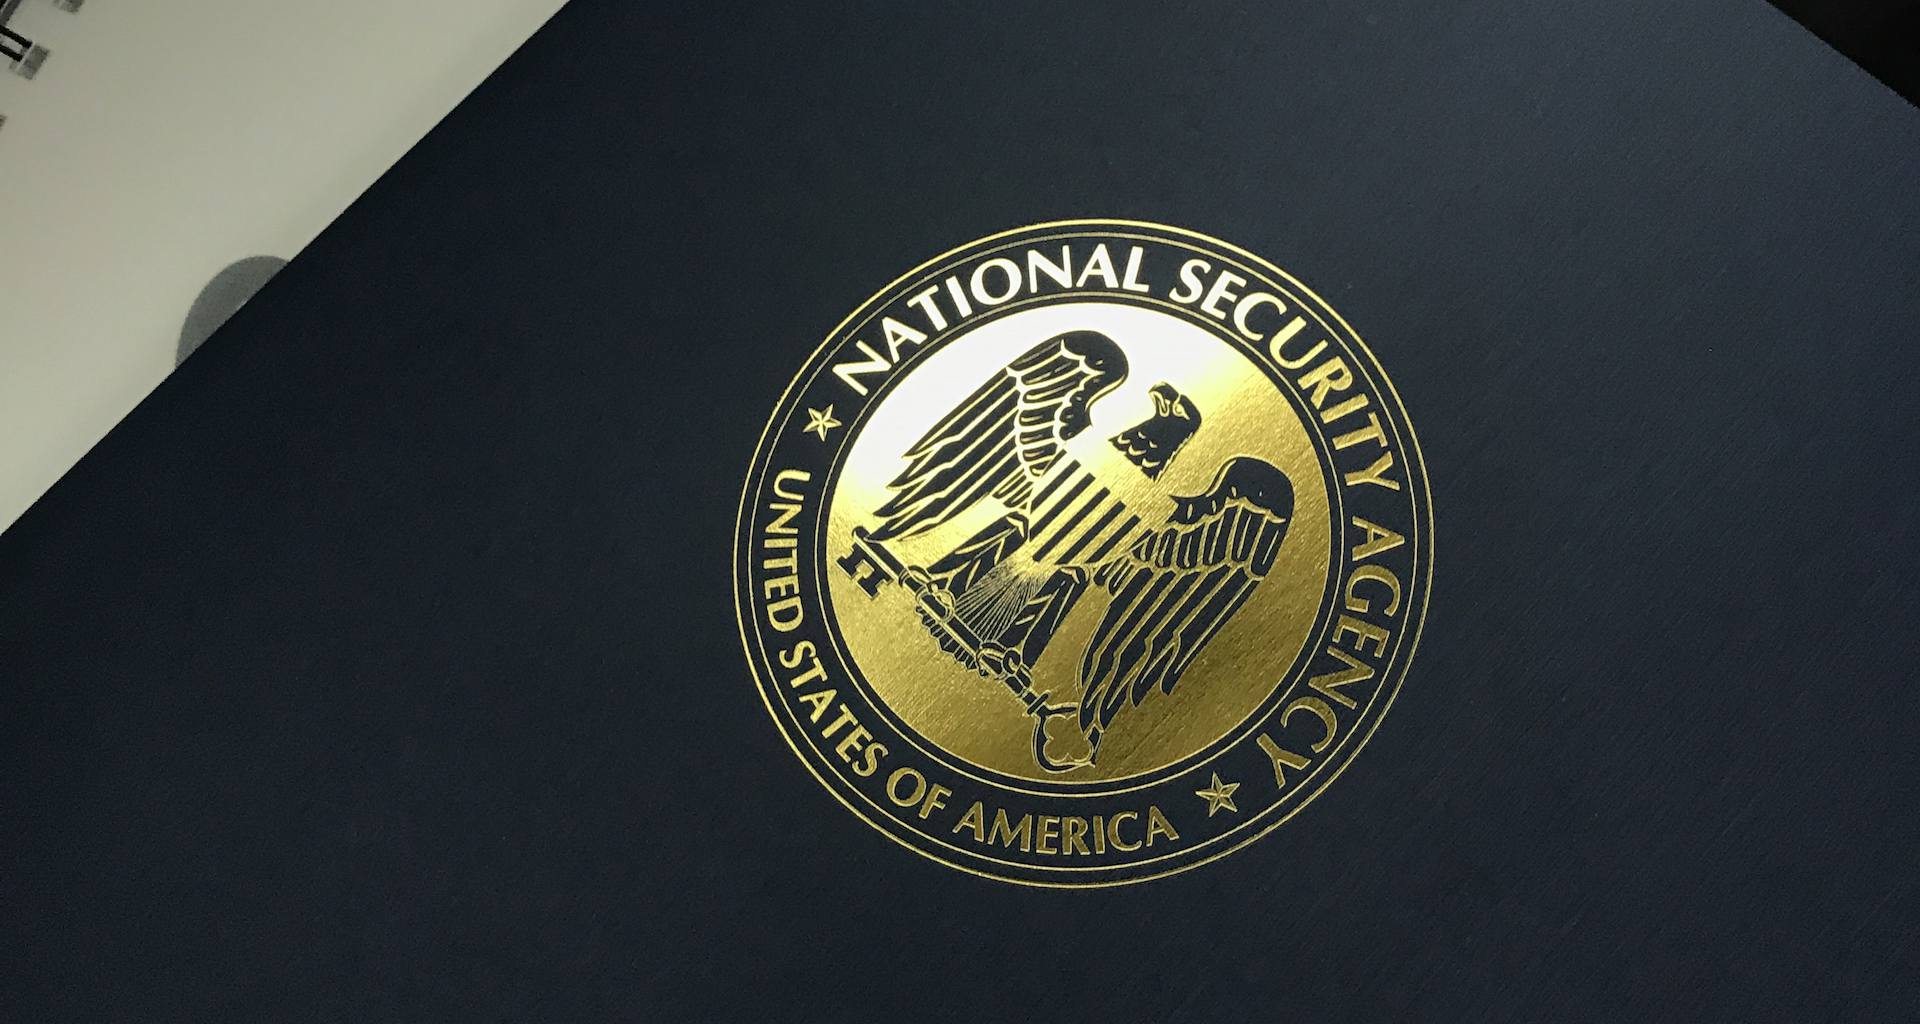 NSA-approved cybersecurity law and policy course now available online | WorkScoop